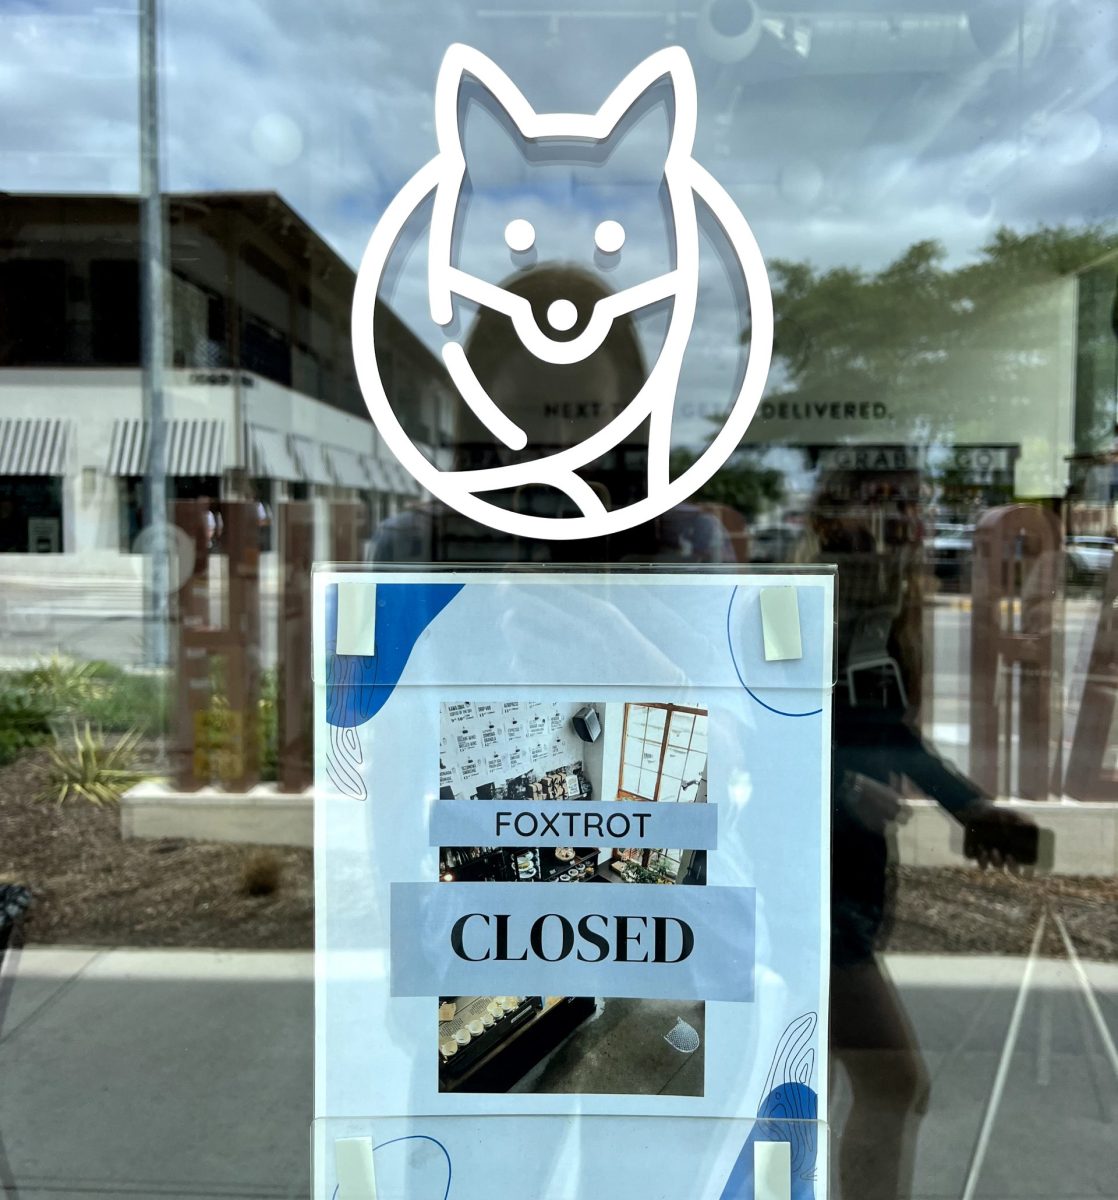 Foxtrot’s abrupt closing leaves SMU students jobless